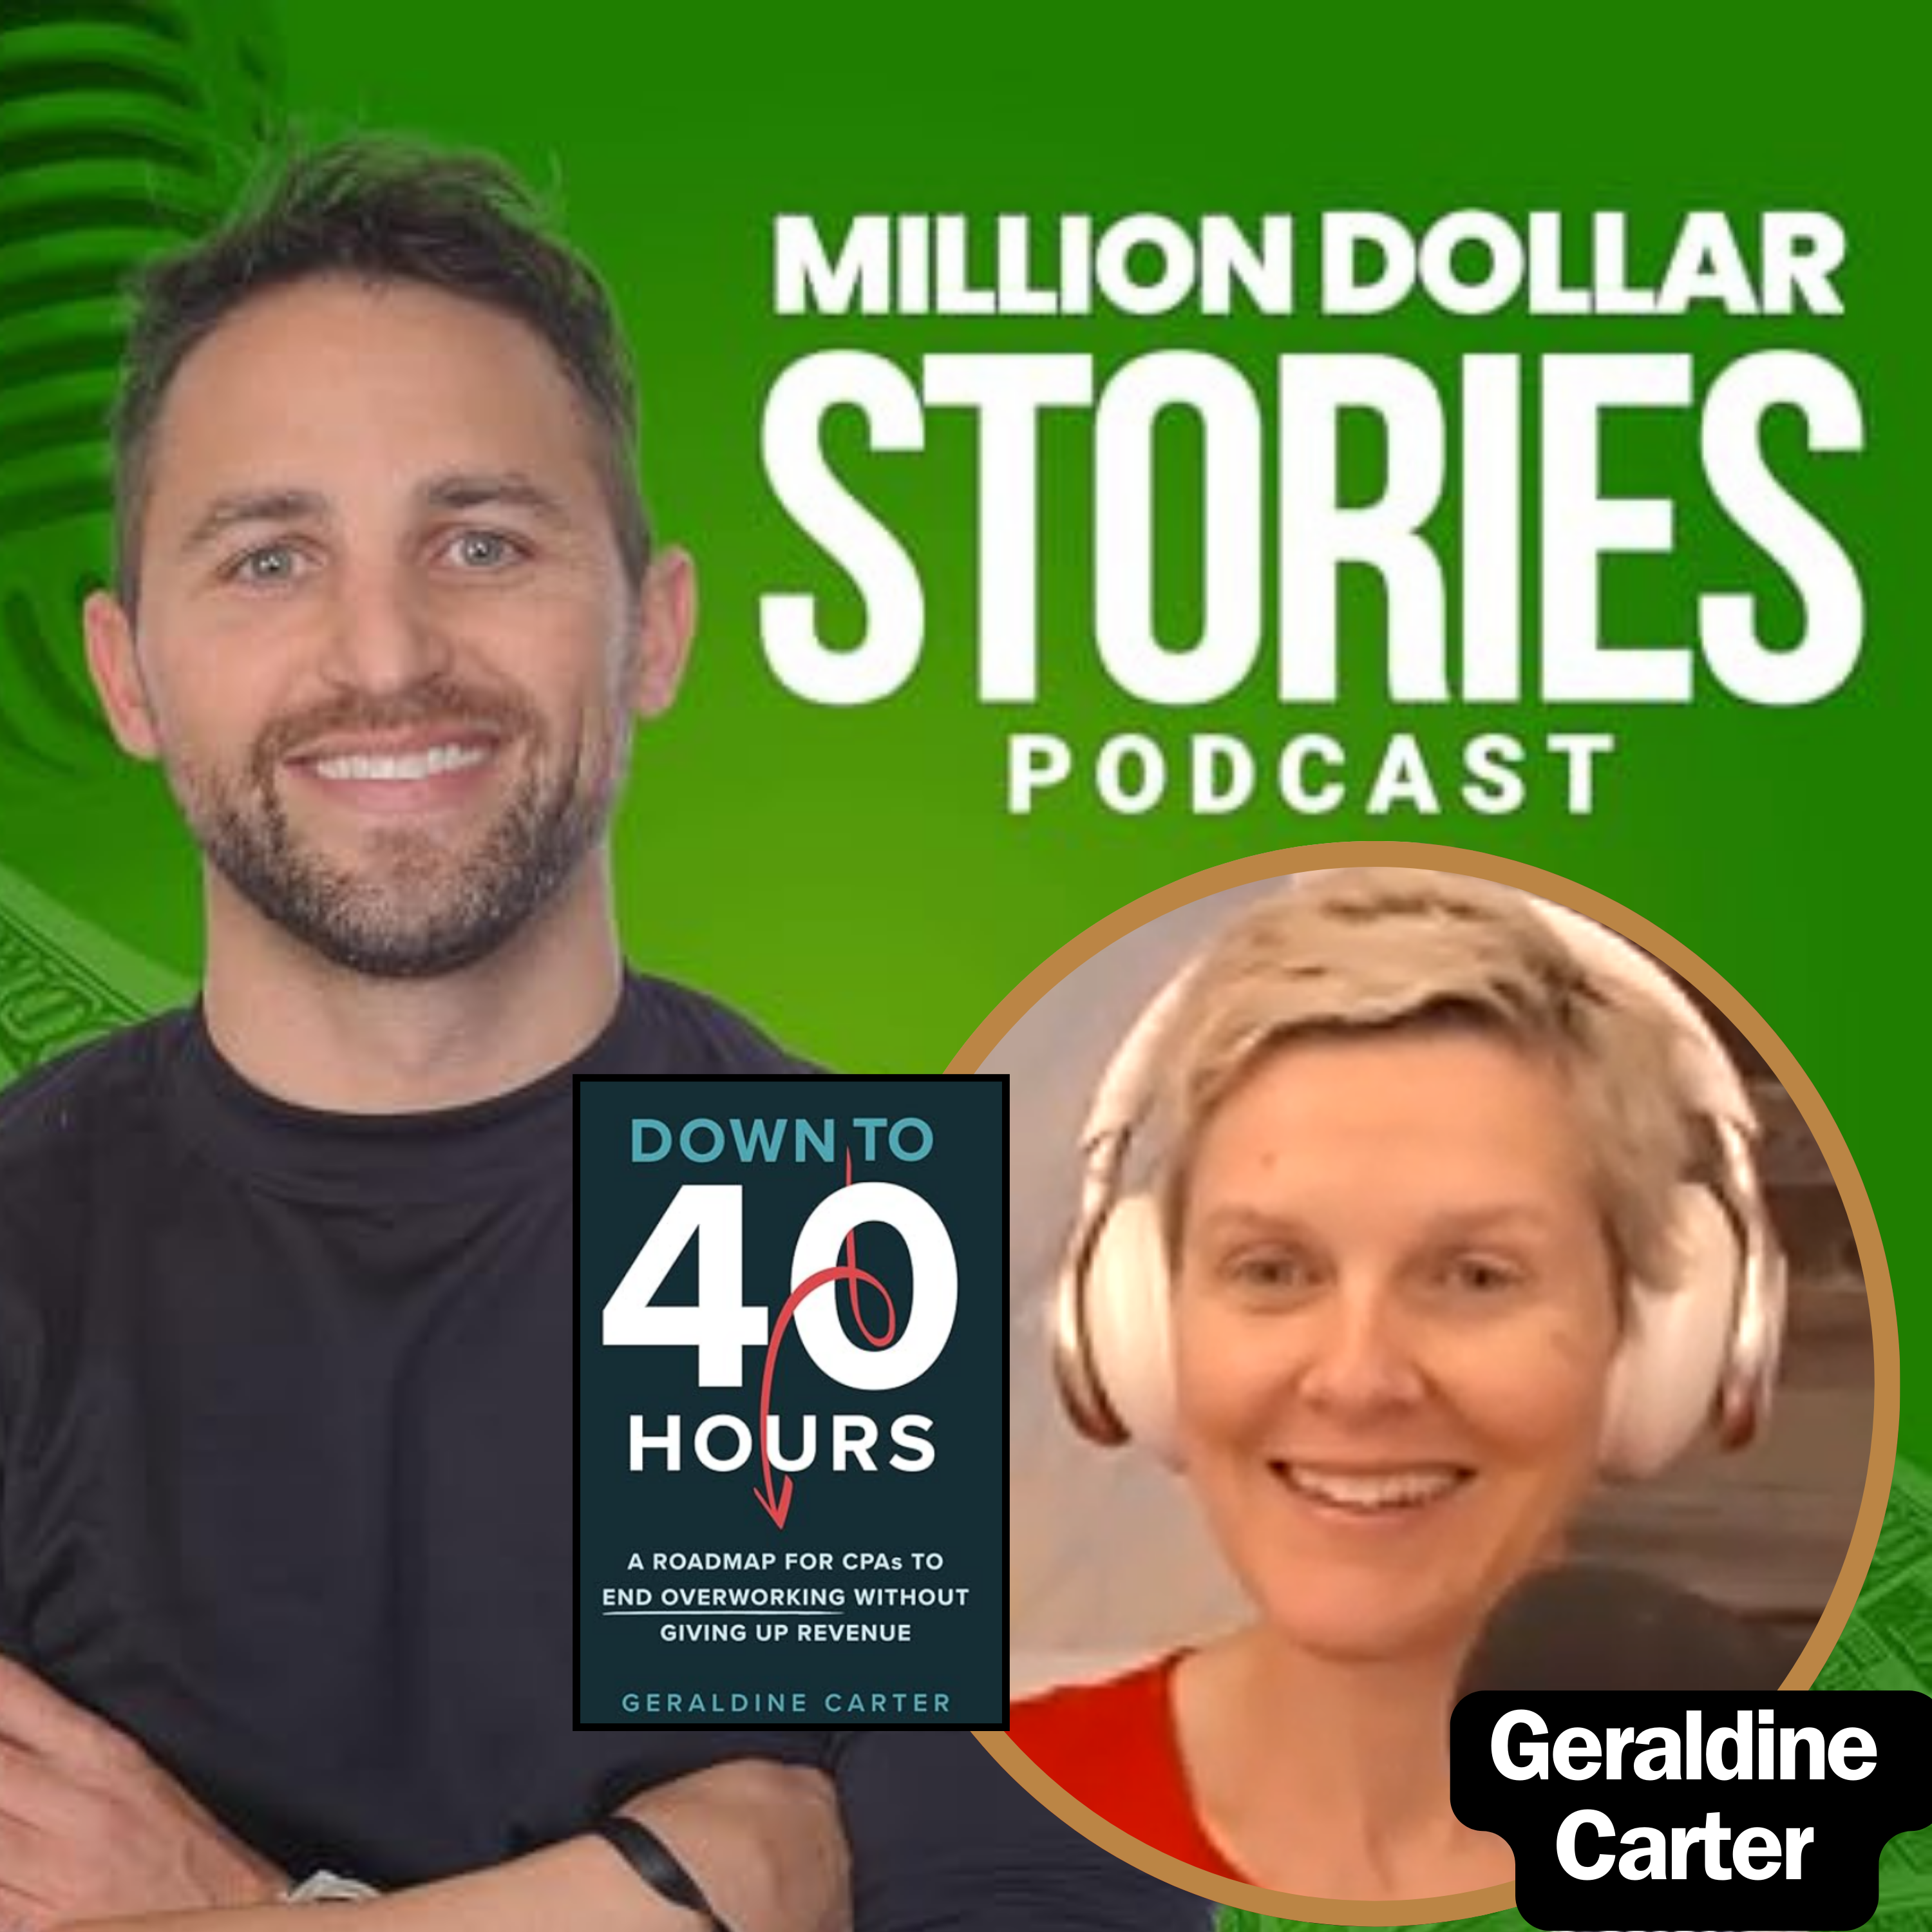 Geraldine Carter – Author of “Down to 40 Hours: A Roadmap for CPAs to End Overworking Without Giving Up Revenue”